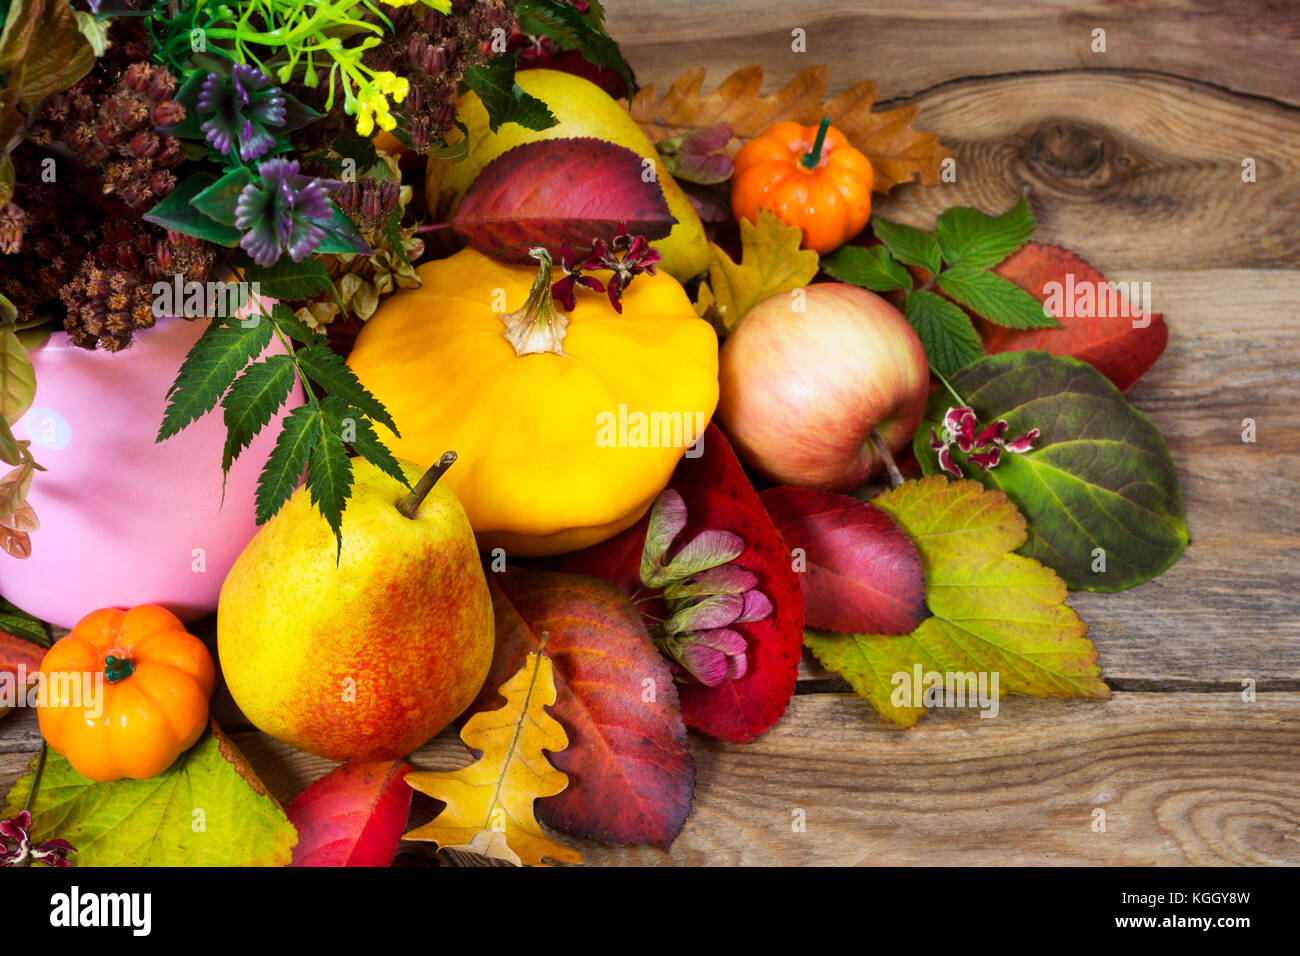 Fall background with wild grass in the pink vase, yellow squash, apples, pears on the rustic wooden table, close up Stock Photo